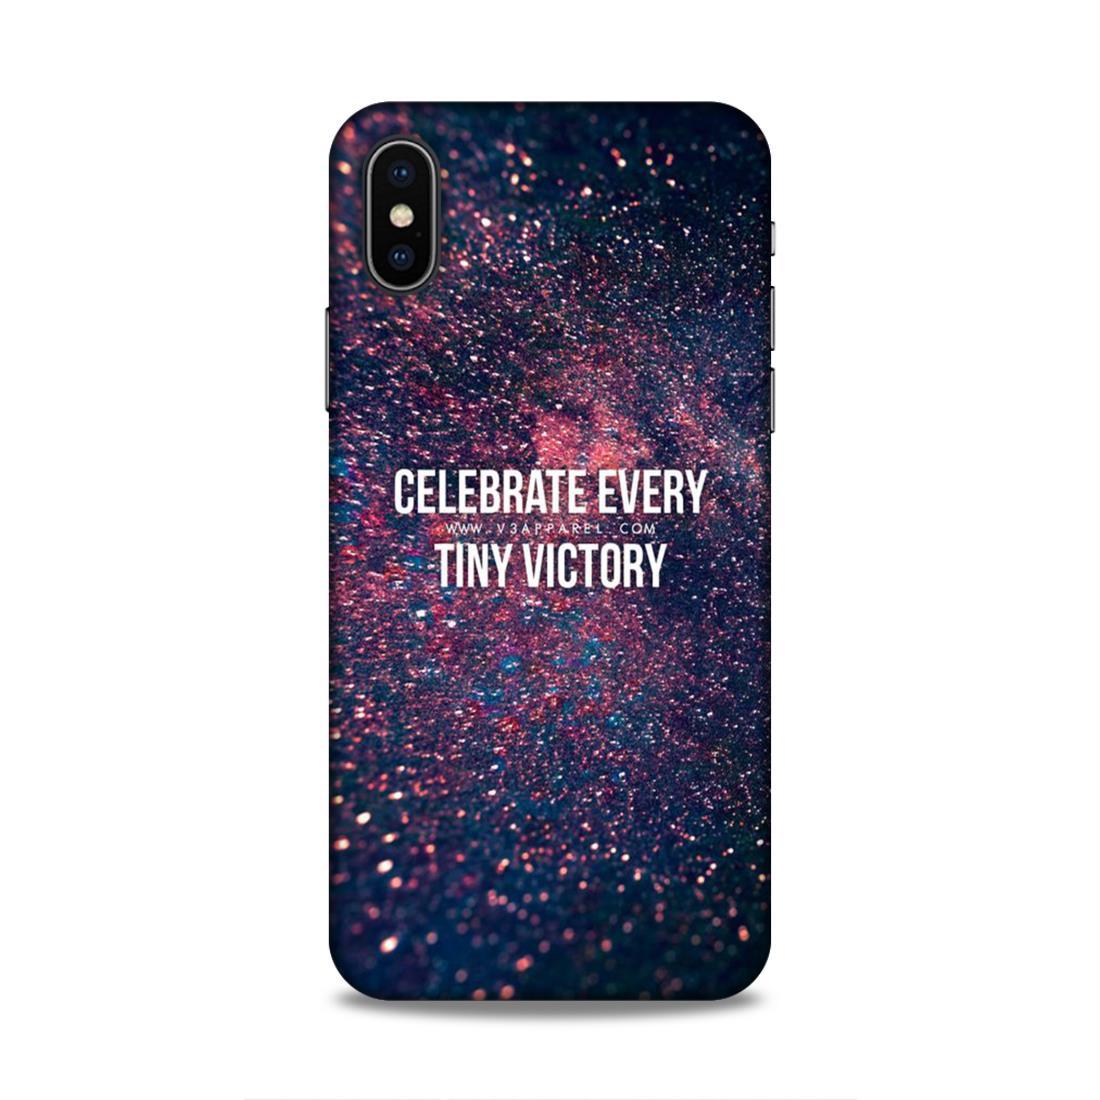 Celebrate Tiny Victory iPhone XS Mobile Cover